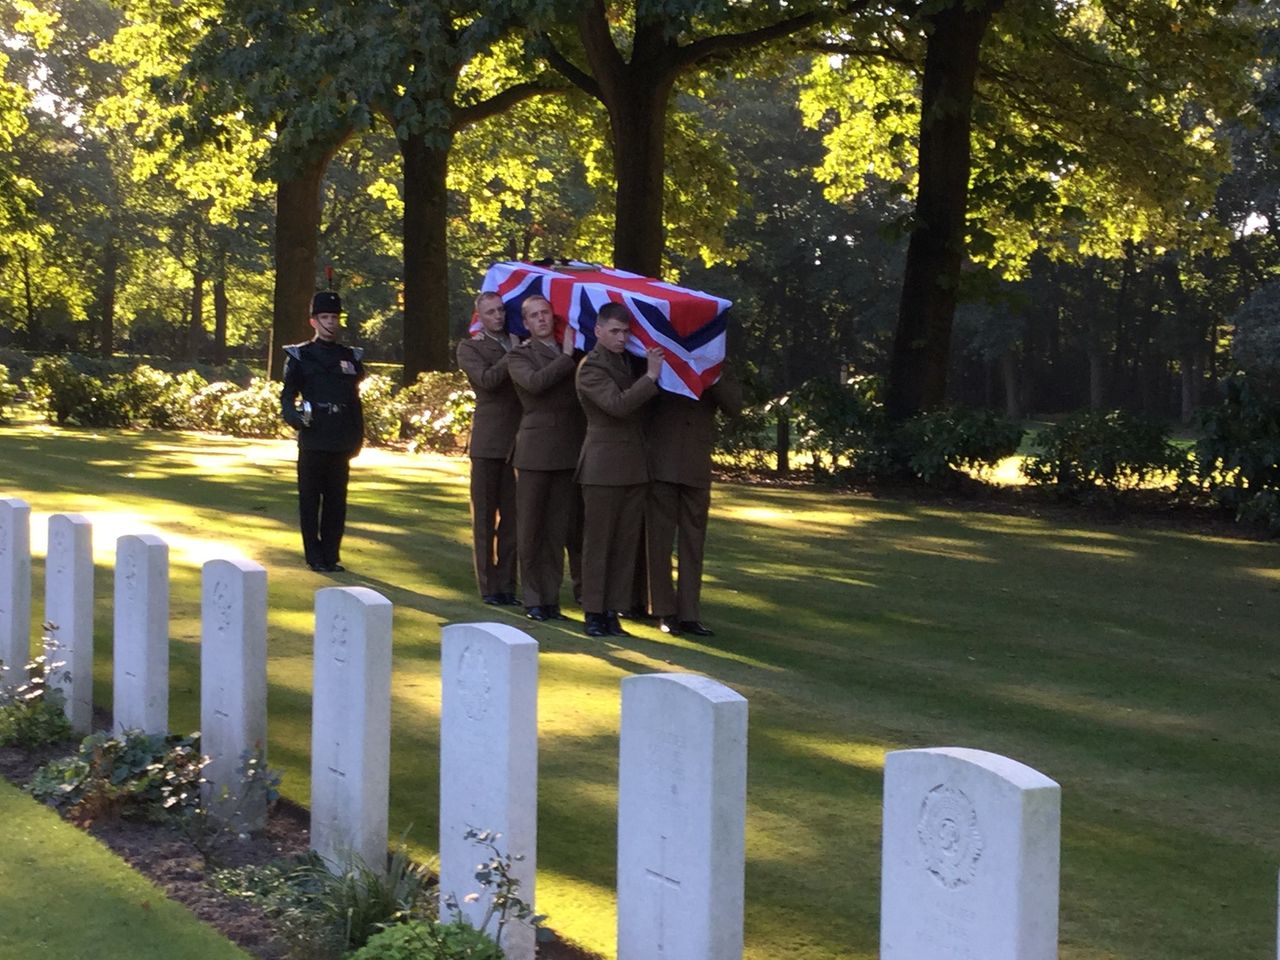 A photo of Lance Corporal Donald Noble's coffin being carried into Arnhem Oosterbeek War Cemetery by a bearer part of 5th Battalion, the Rifles 